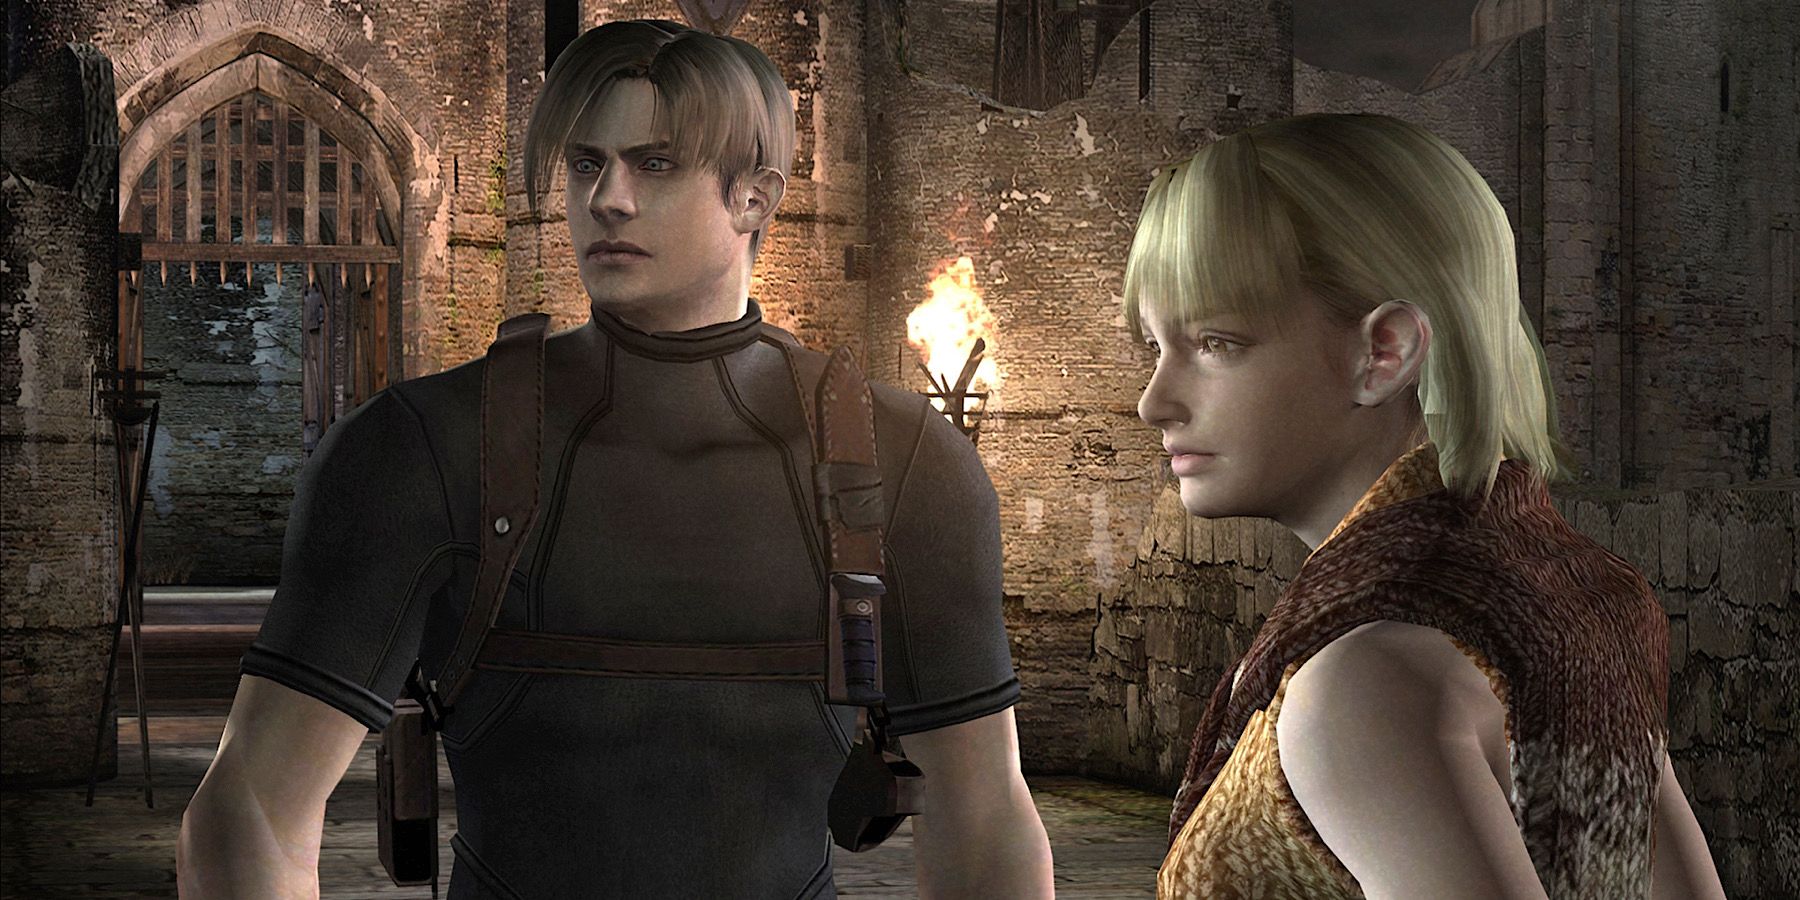 Resident Evil 4 Remake will tweak escort missions, among other changes